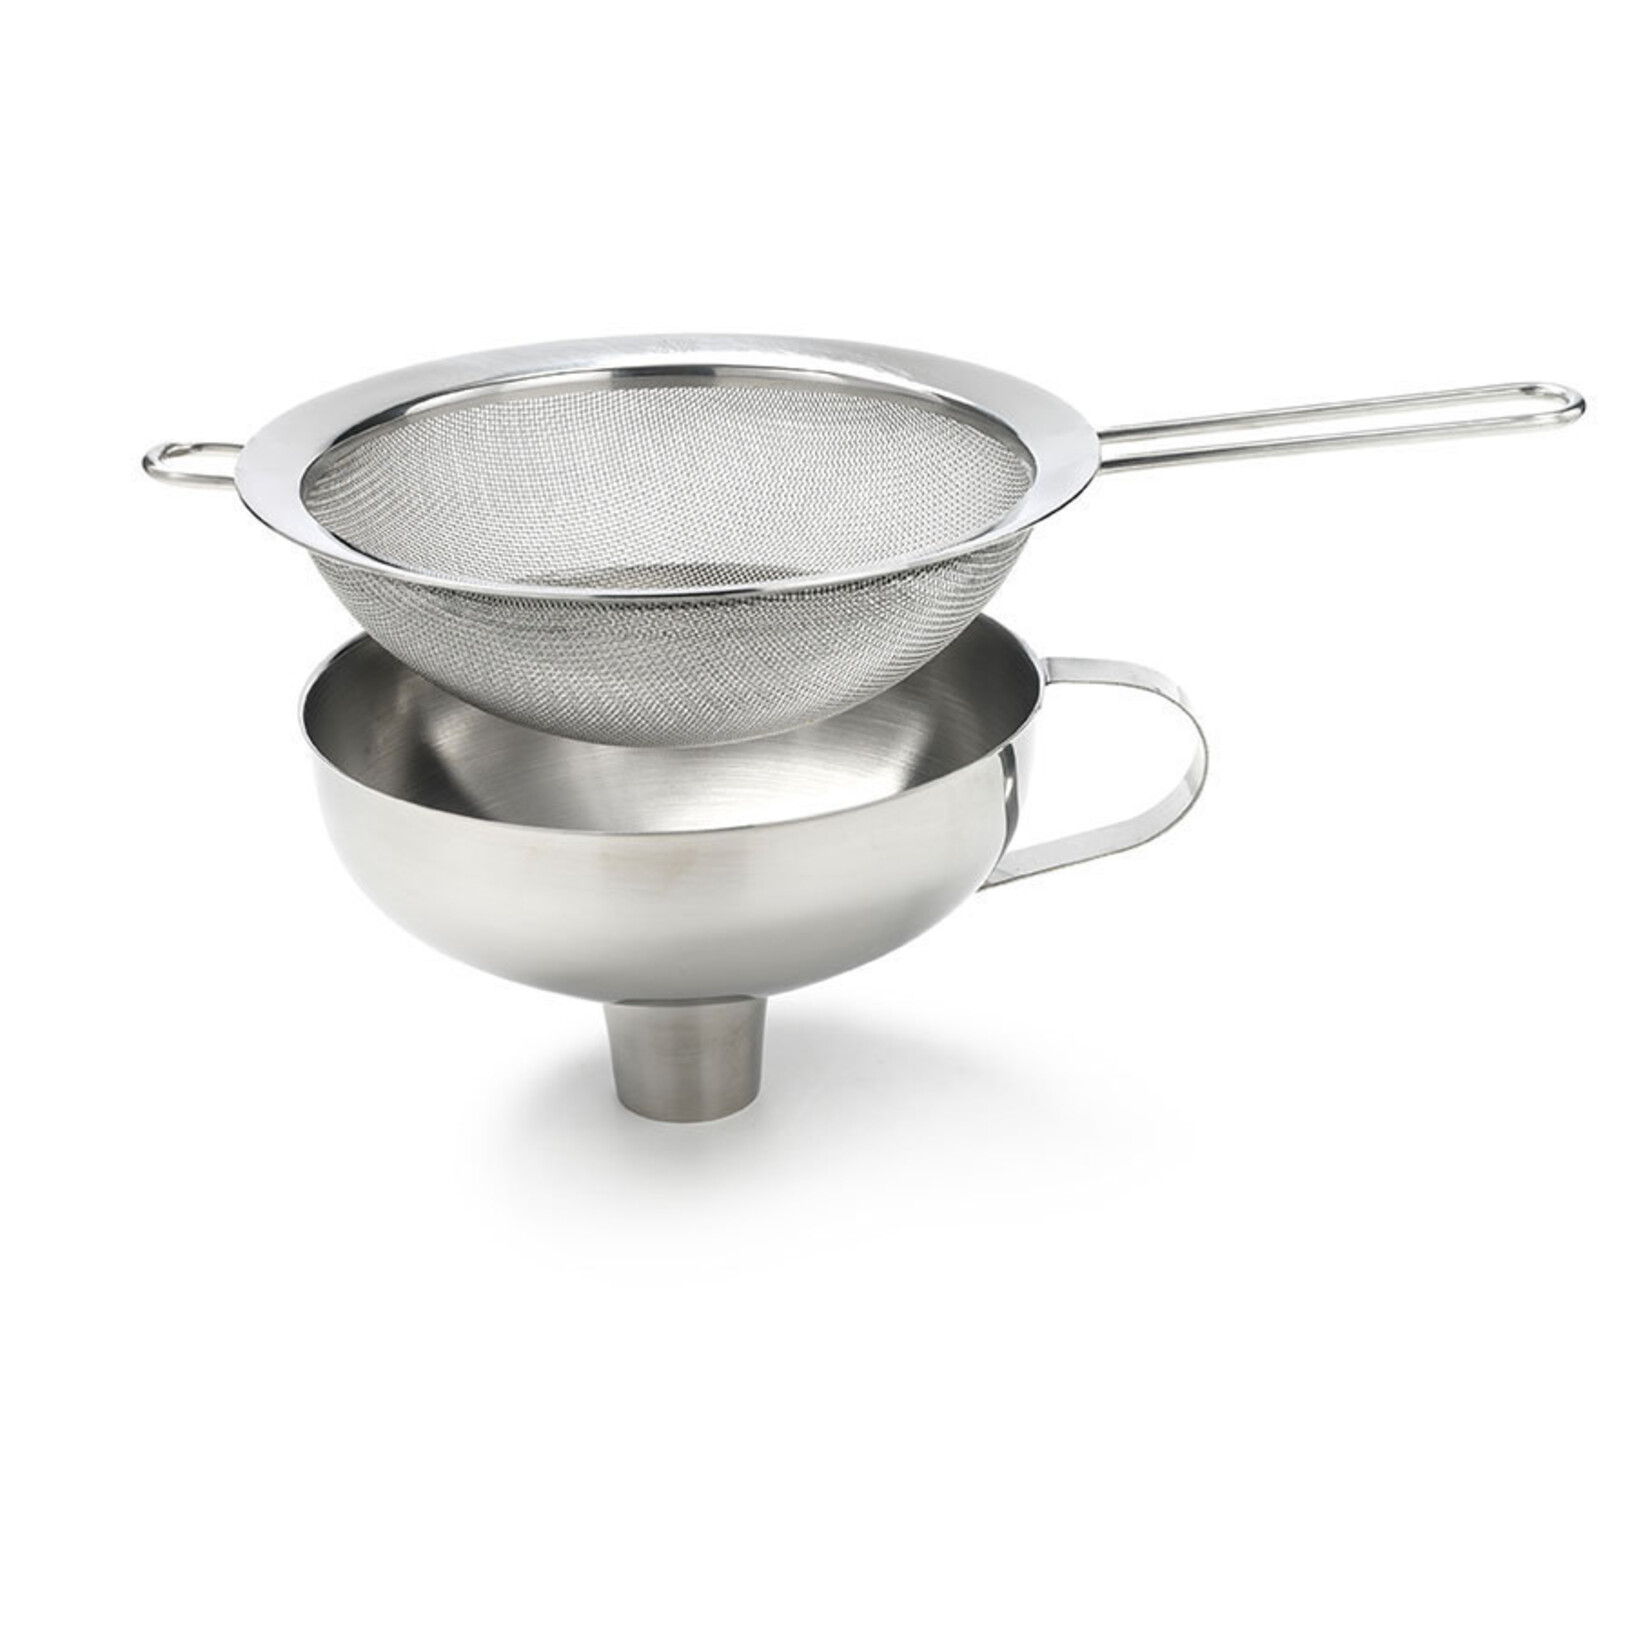 iSi Culinary Whip rvs iSi trechter en zeef iSi rvs funnel & Sieve iSi 2724